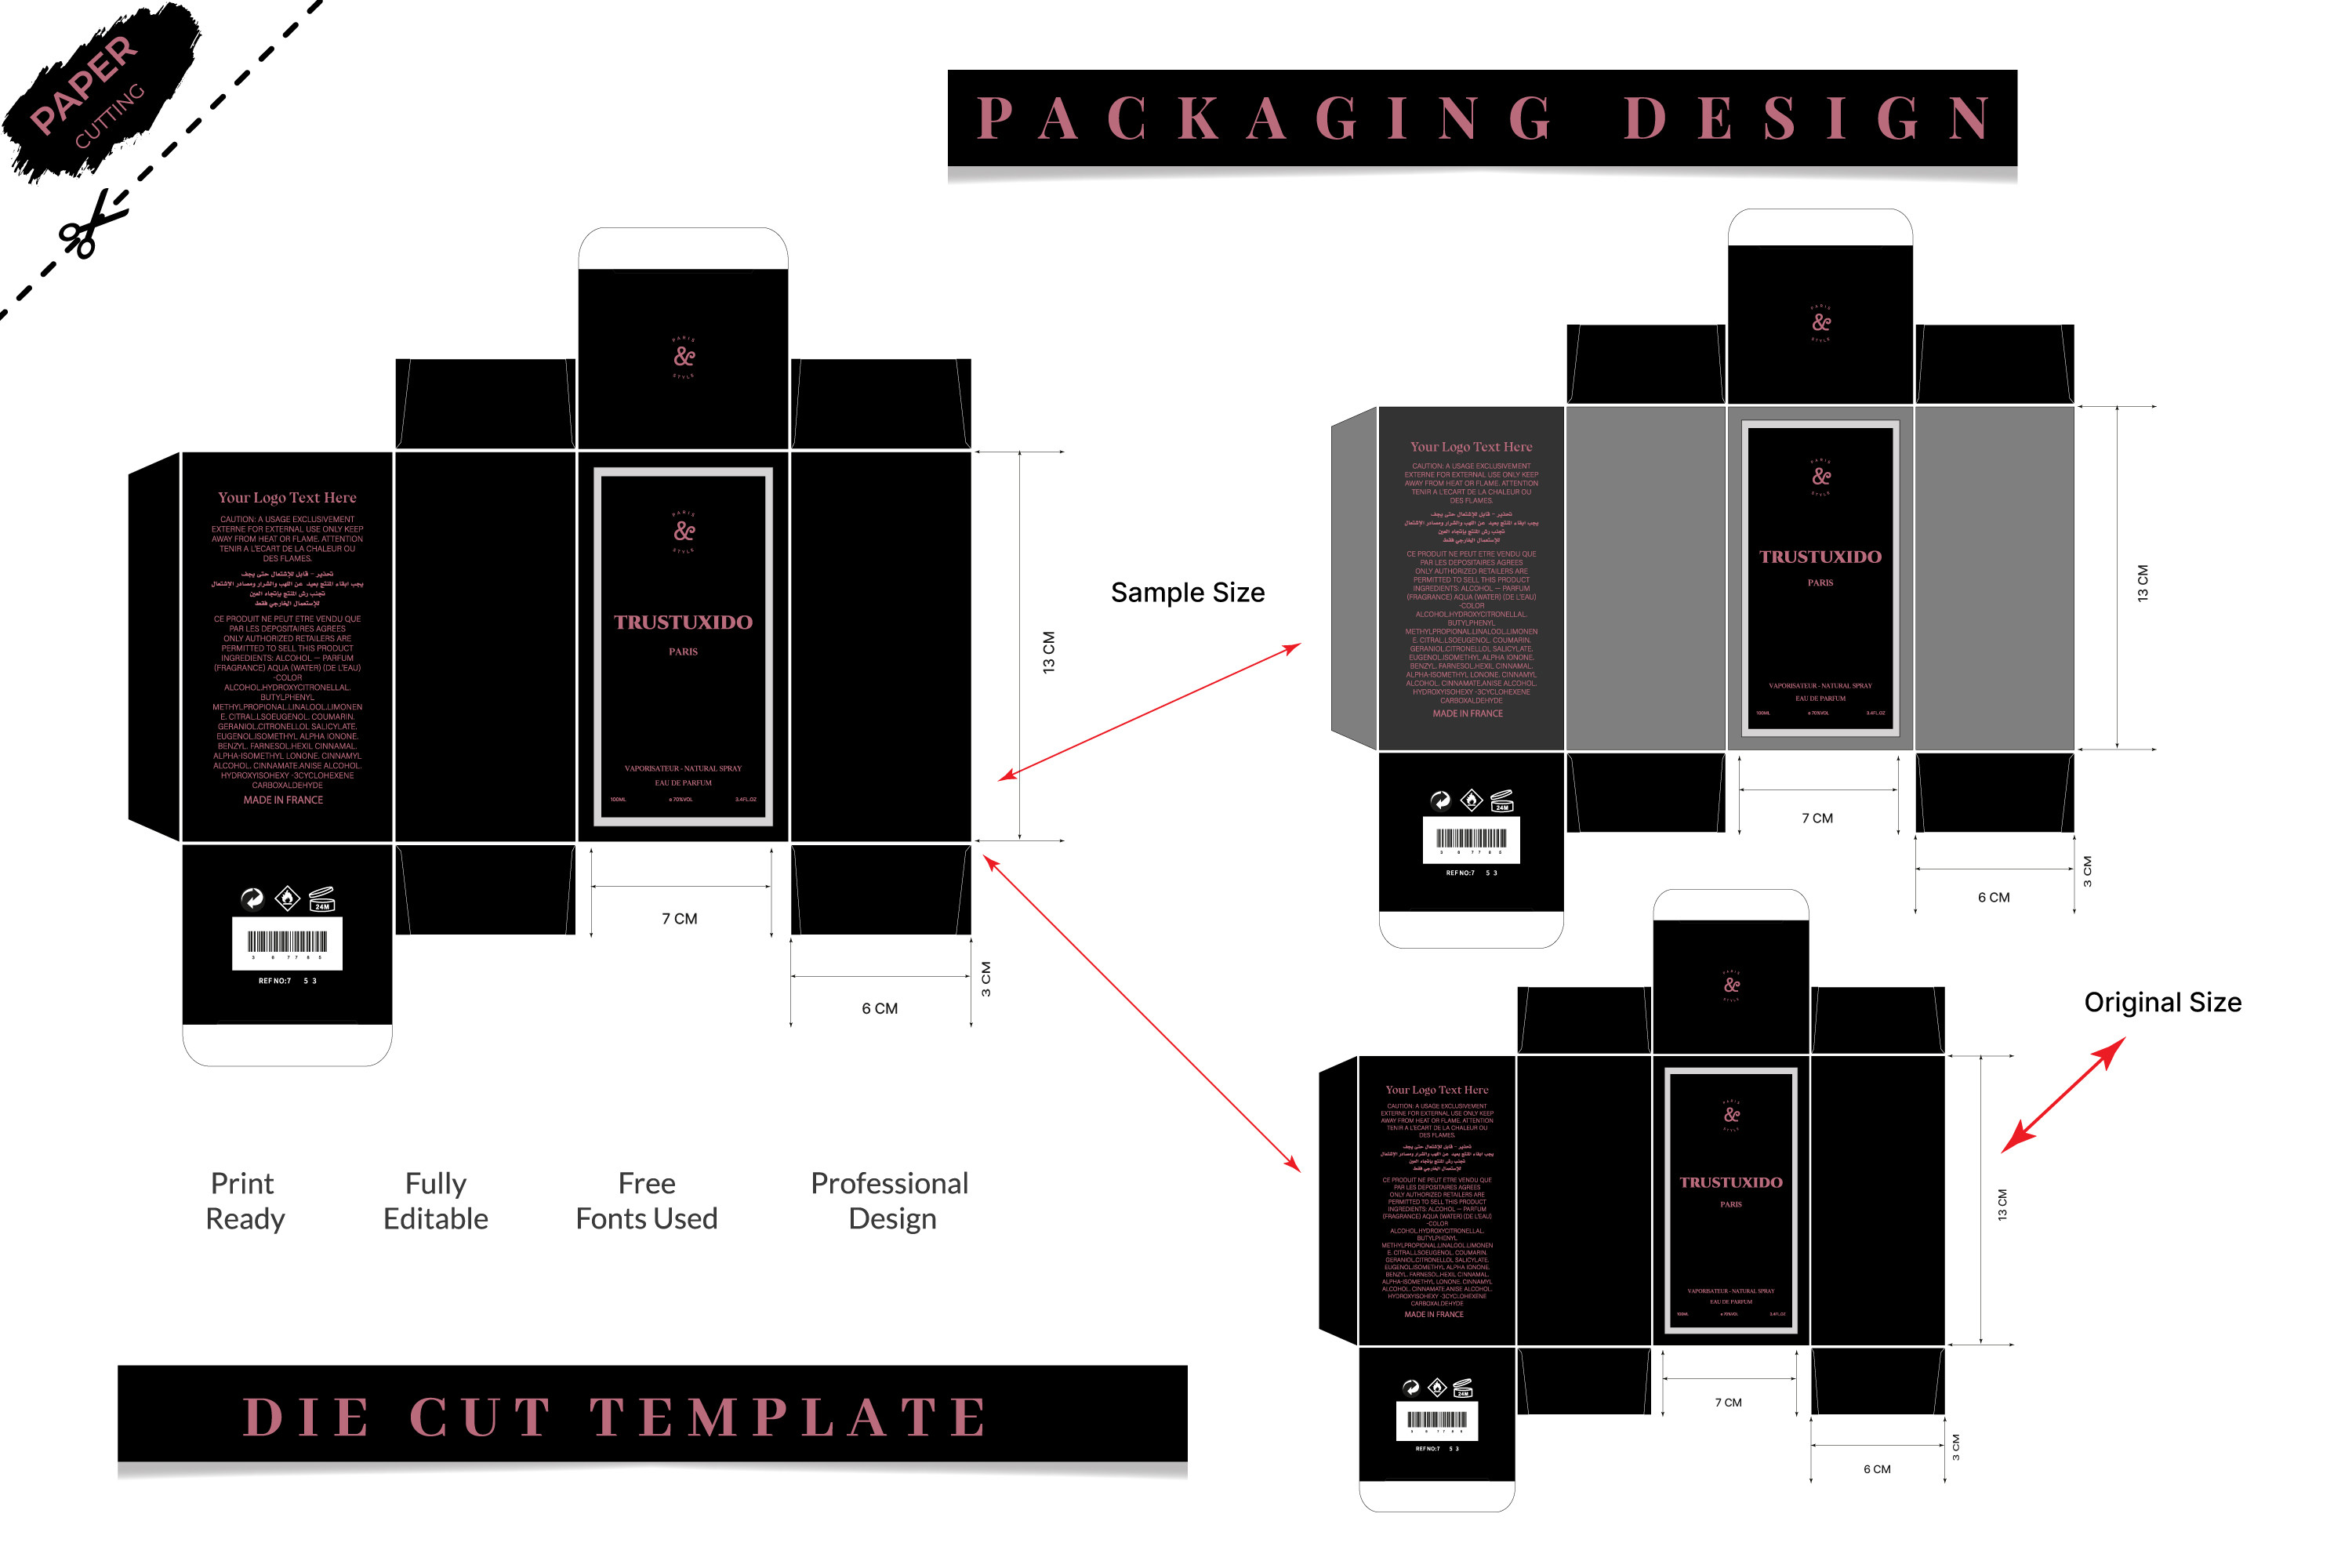 Box Packaging Die Cut Template Design Graphic by sumonuix · Creative ...